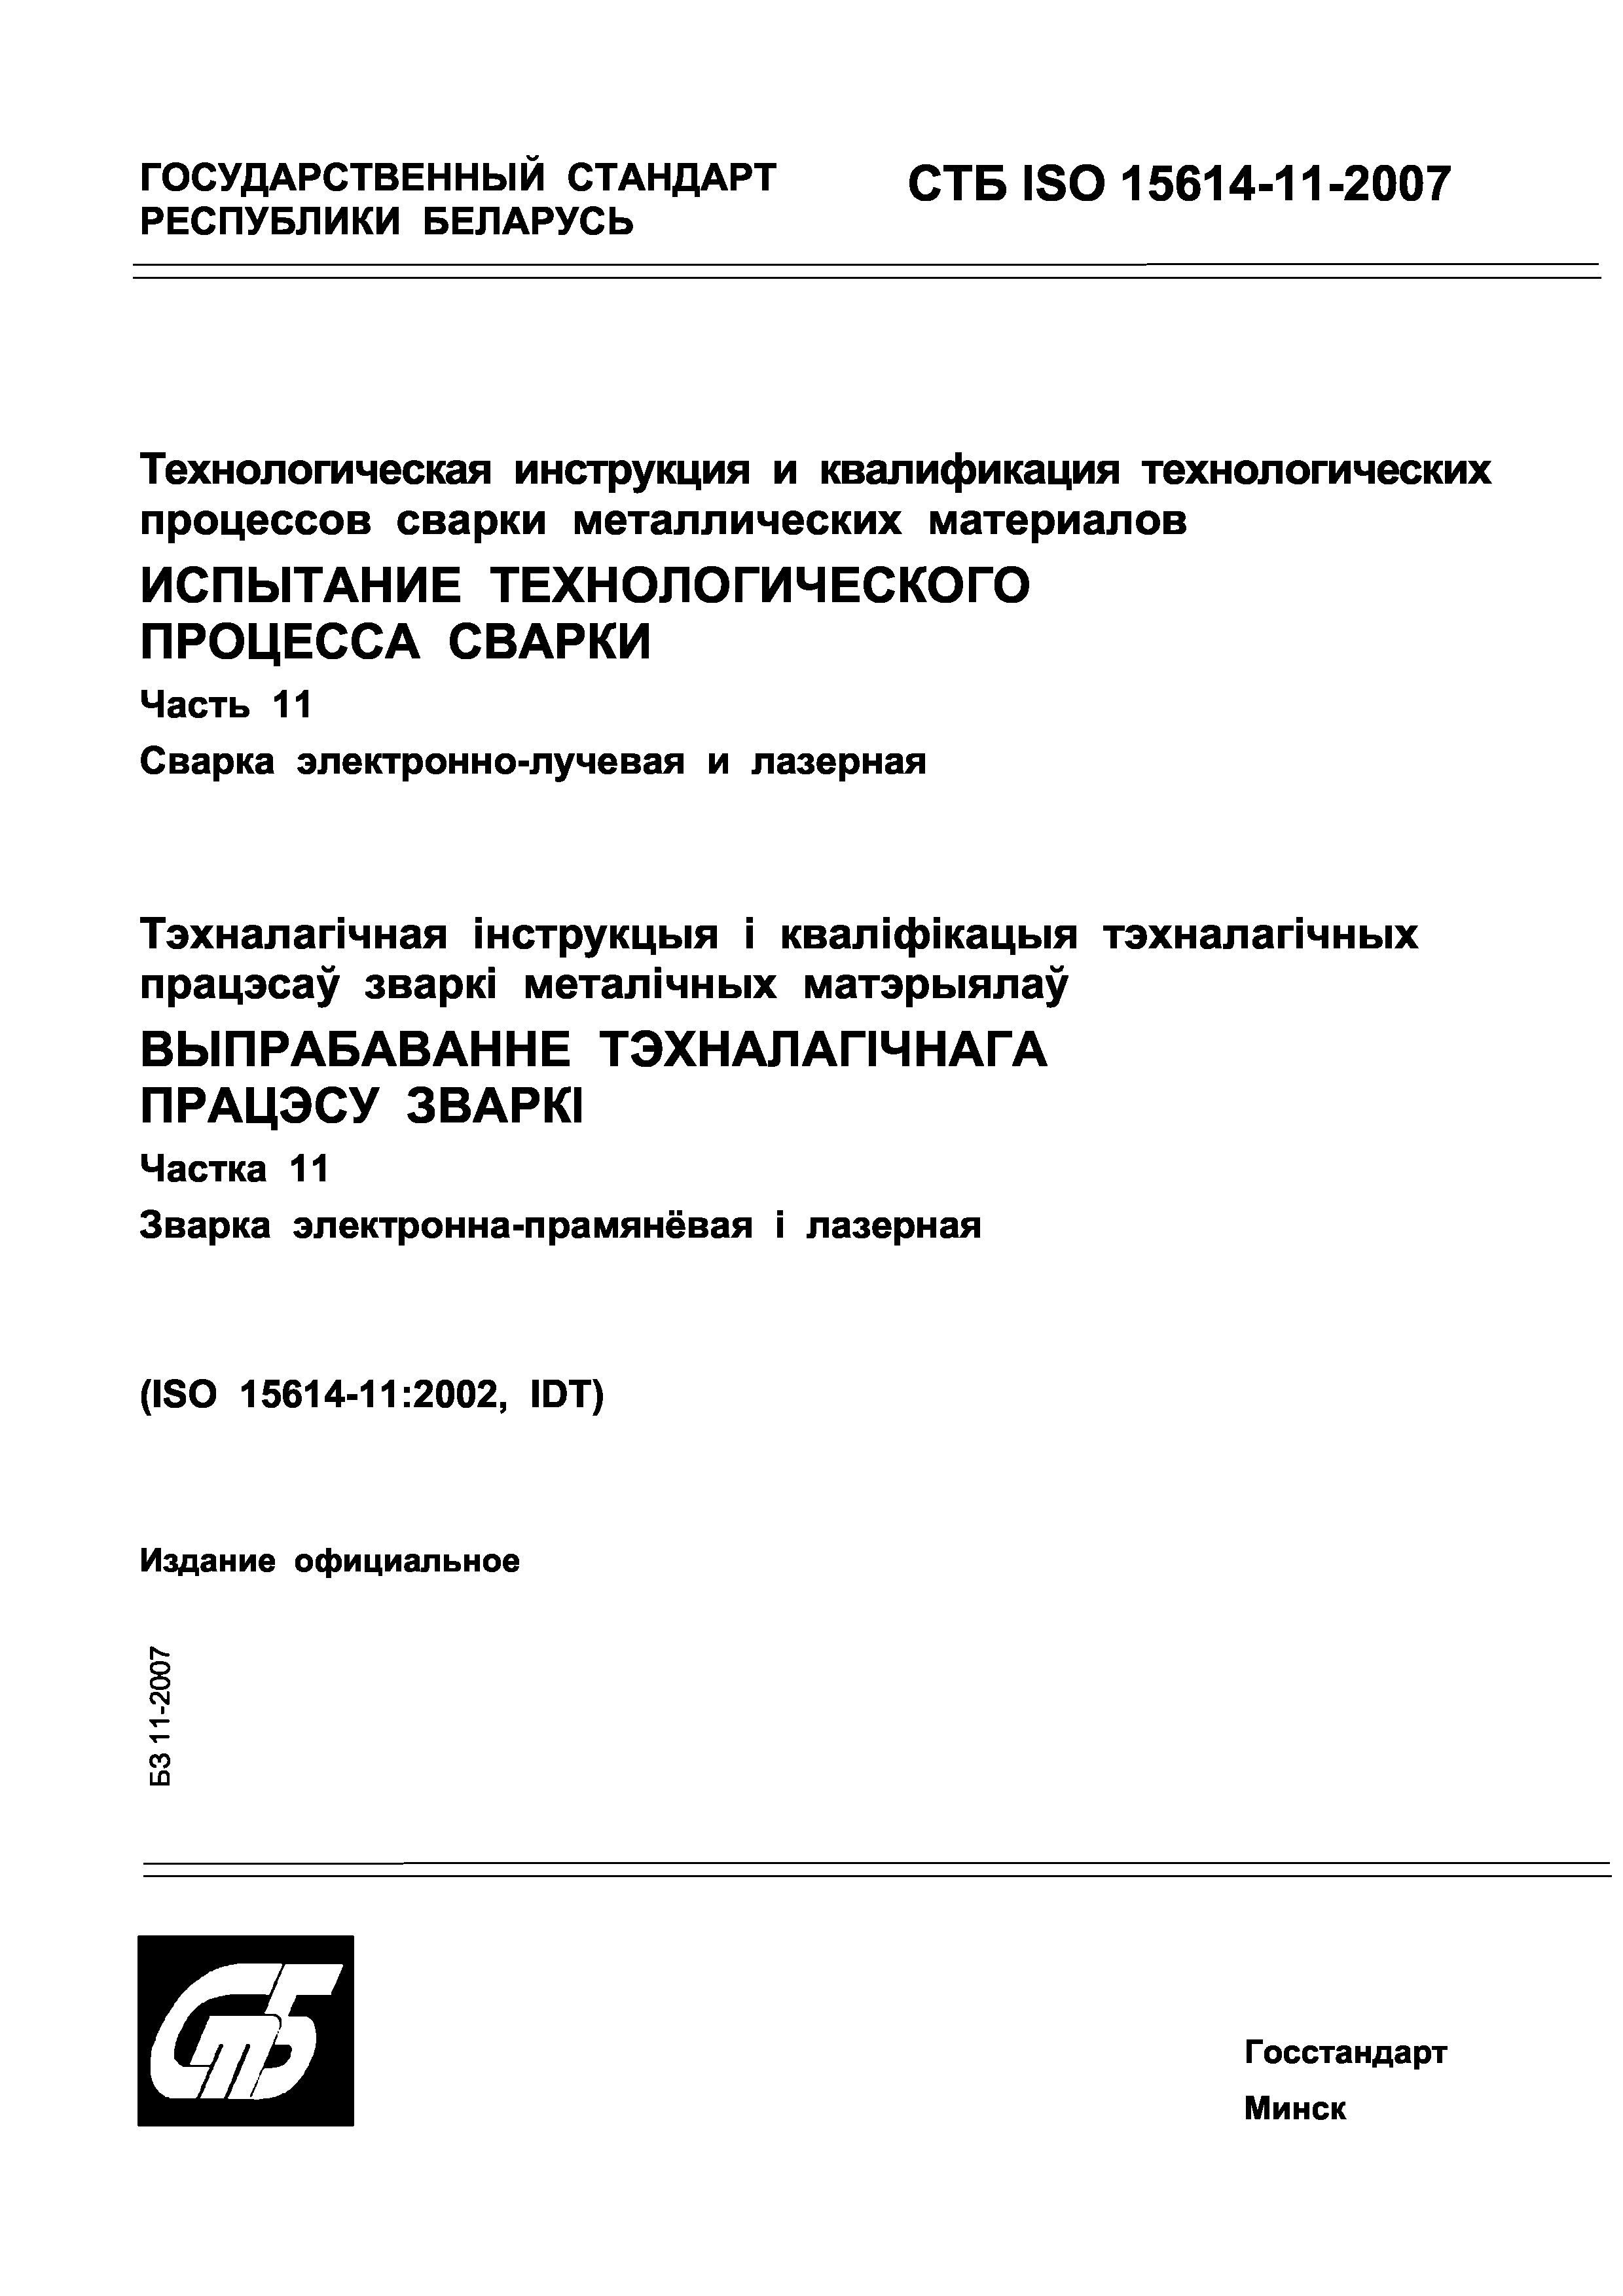 СТБ ISO 15614-11-2007